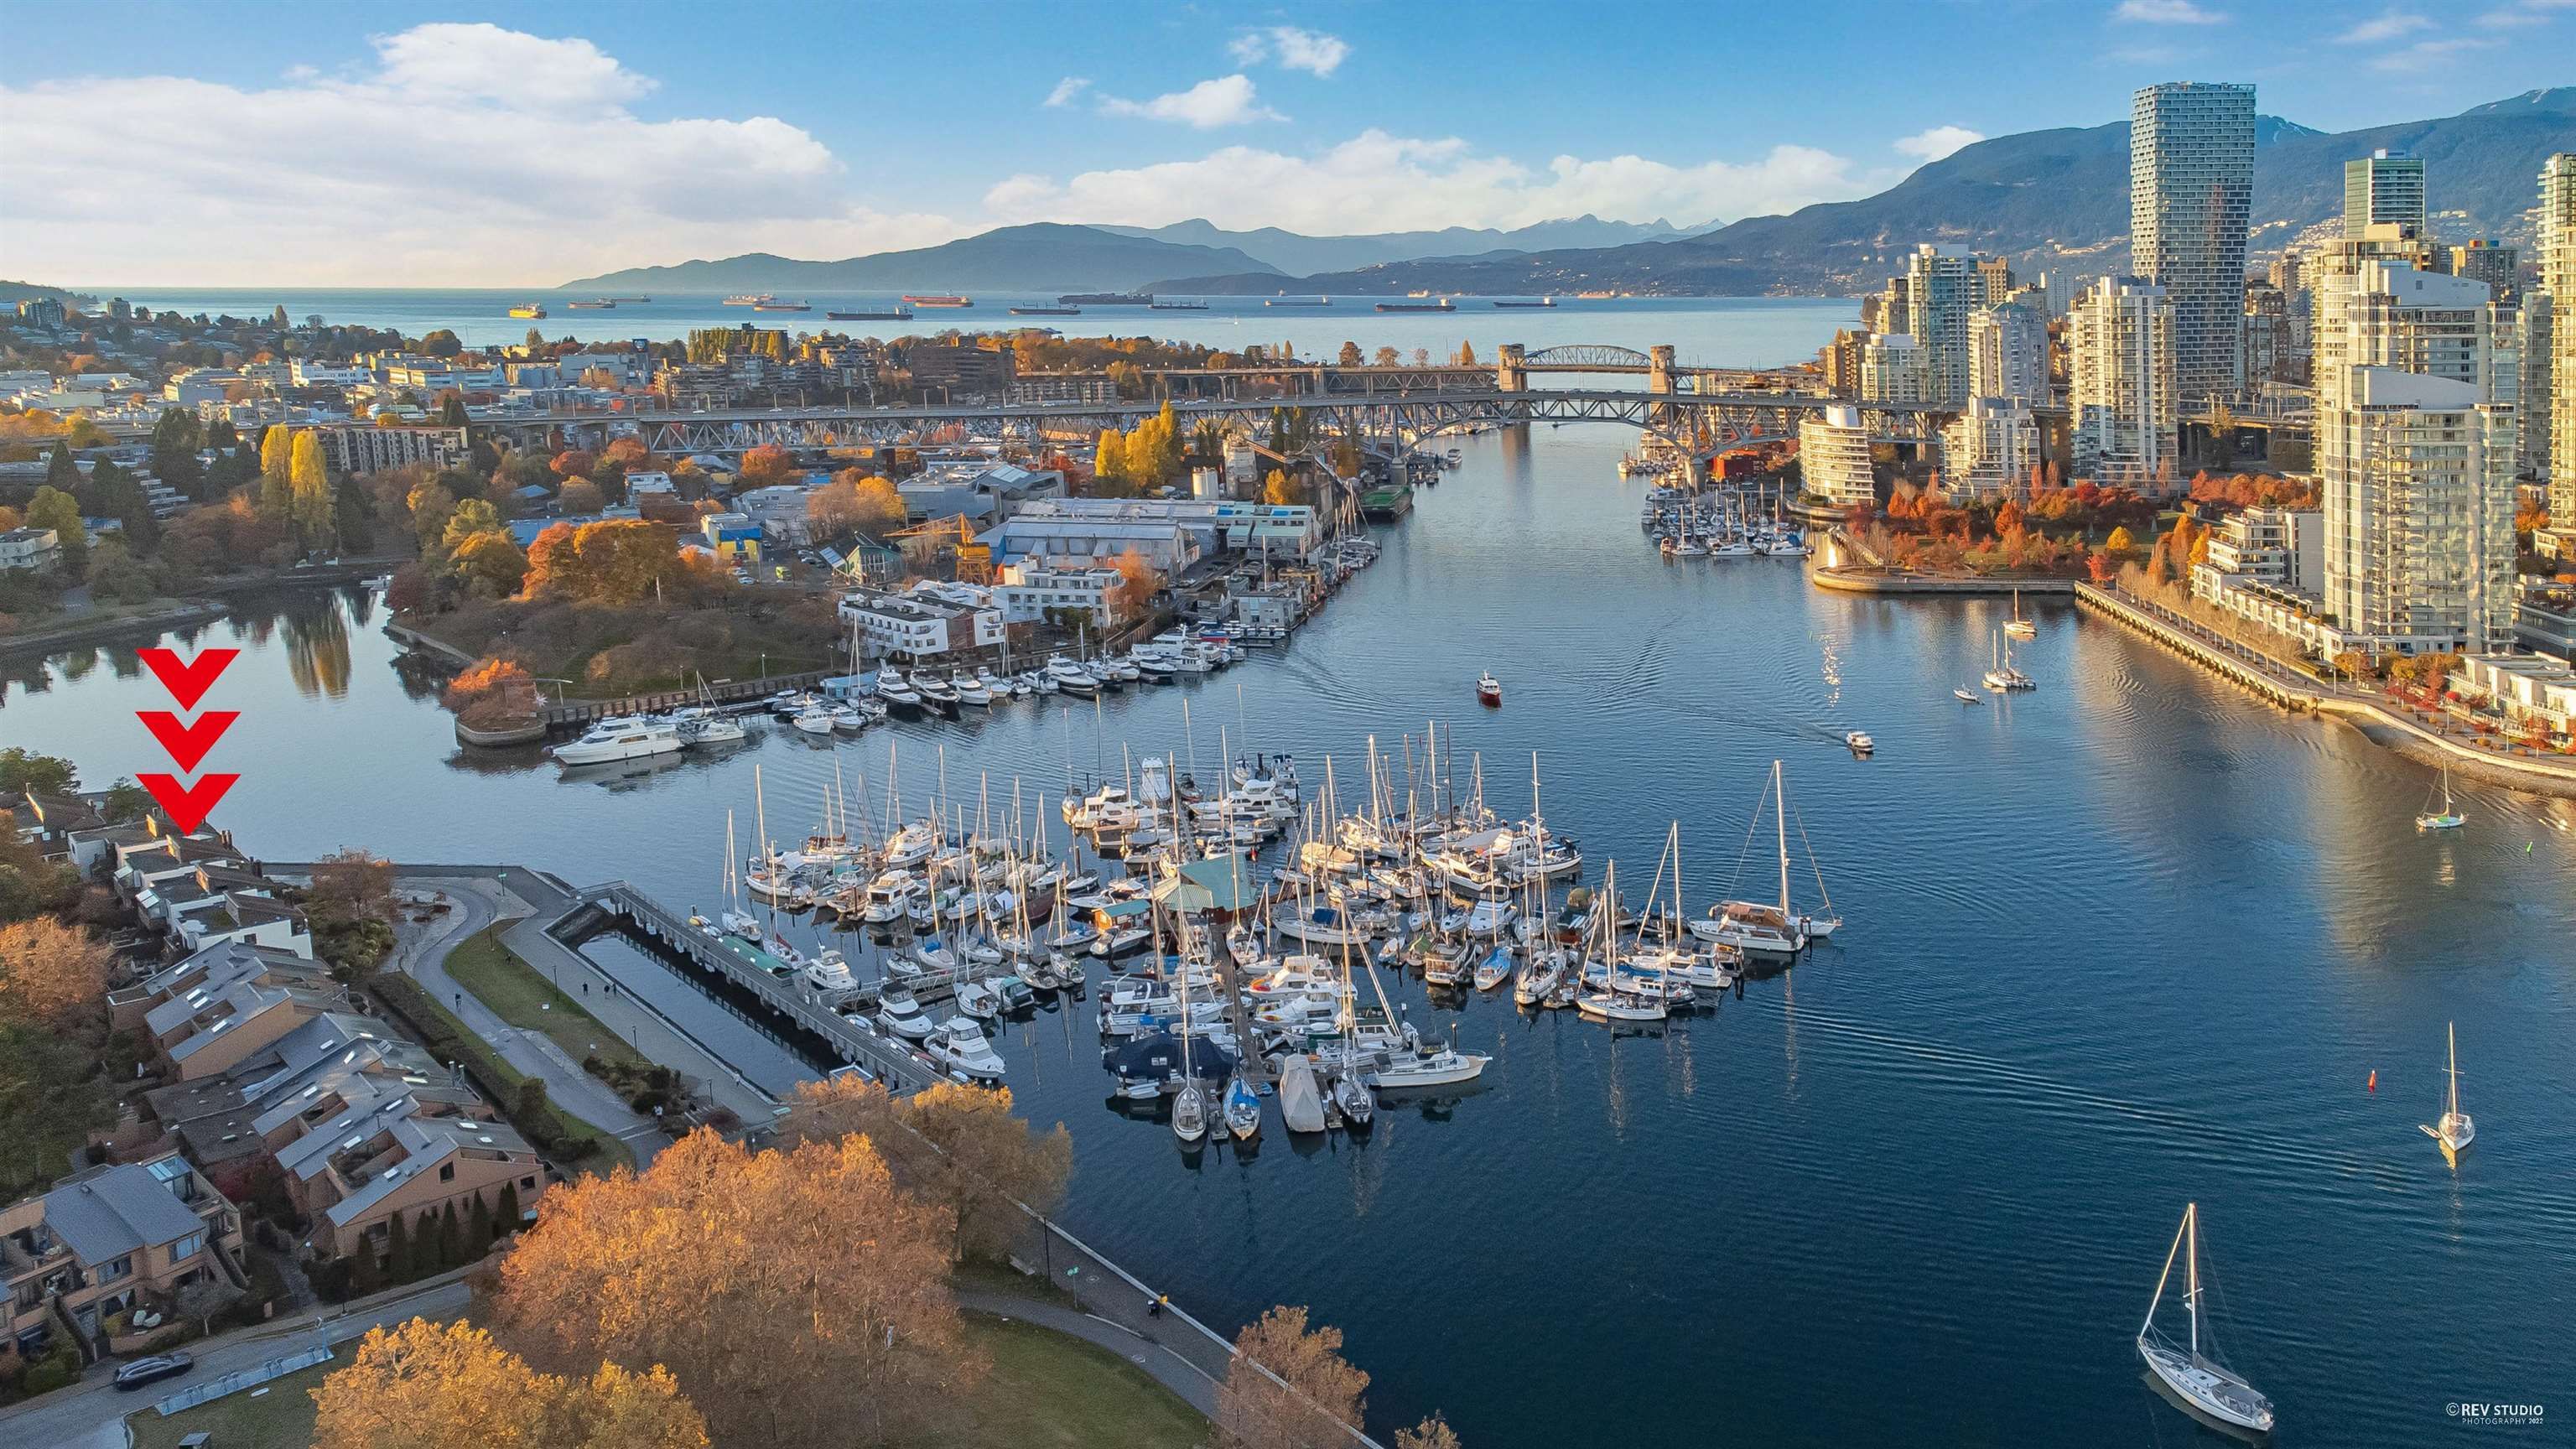 Open House. Open House on Sunday, October 8, 2023 2:00PM - 4:00PM
WATERFRONT TOWNHOUSE w/stunning water, marina, cityscape and mtn views. Larger private corner unit with 3 bedrooms, 2 bathrooms, sunroom, office and covered waterfront deck. Features many q